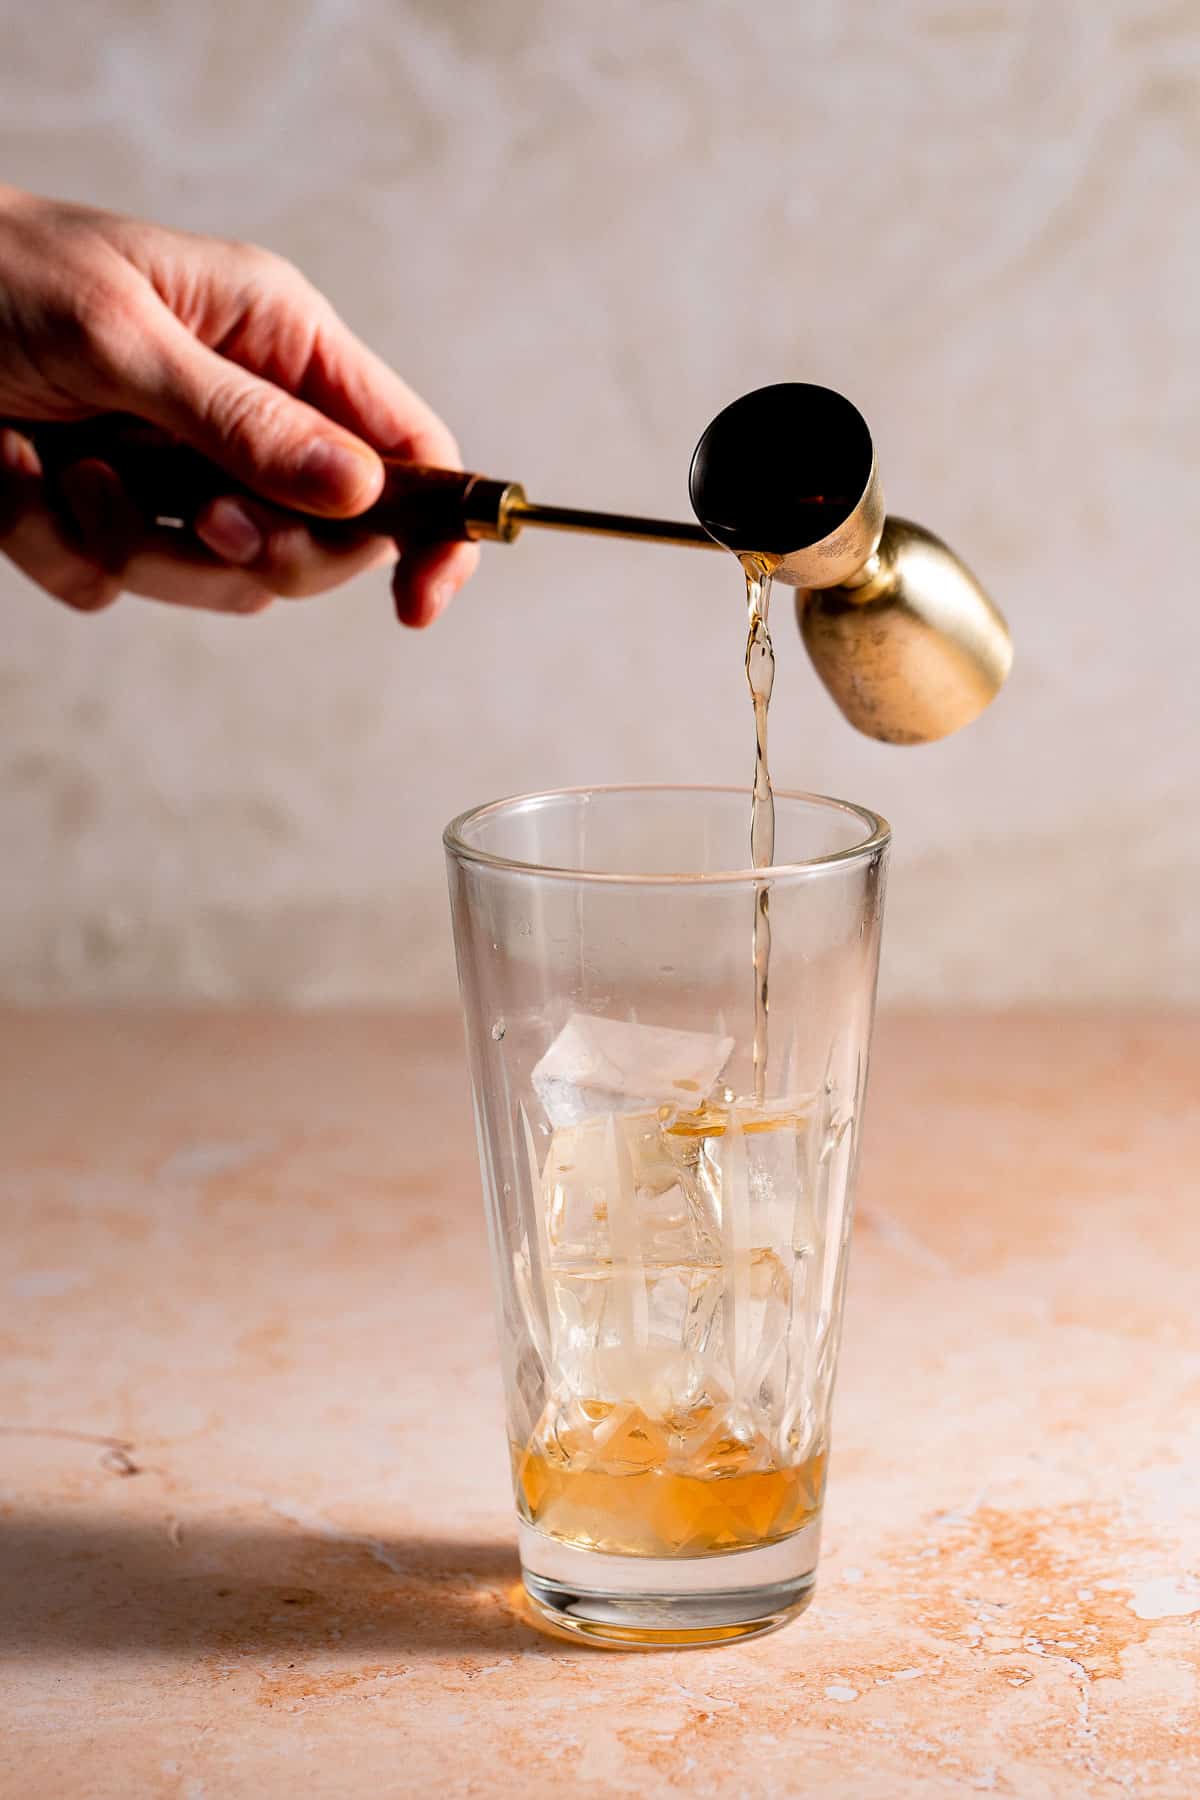 Rum pouring into a glass filled with ice